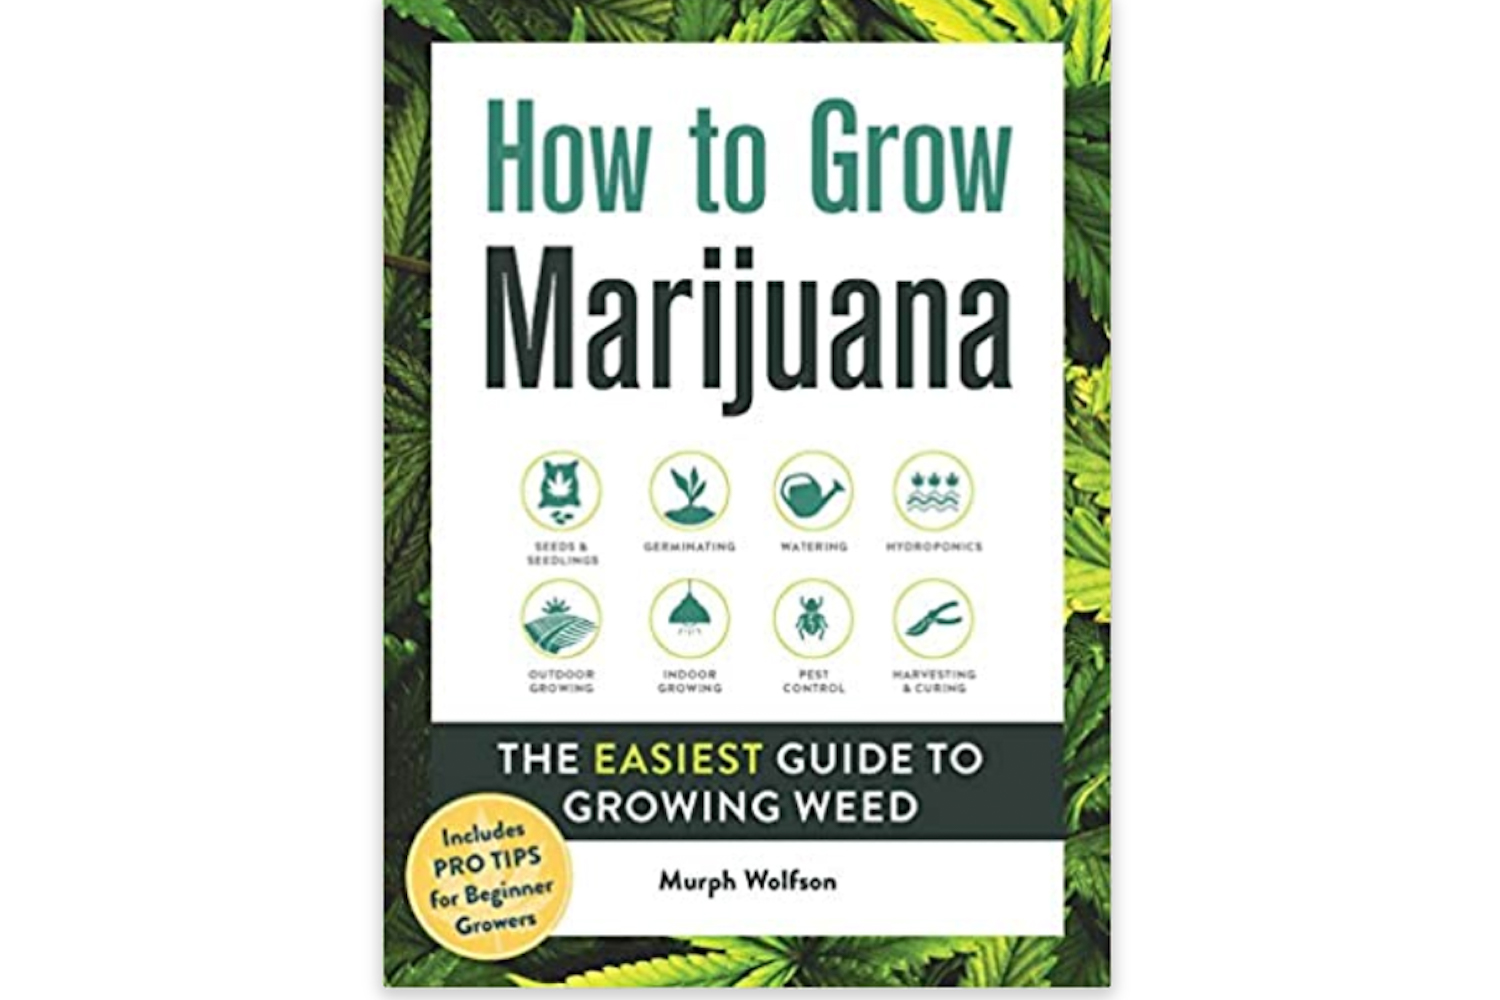 the cannabis grow bible review